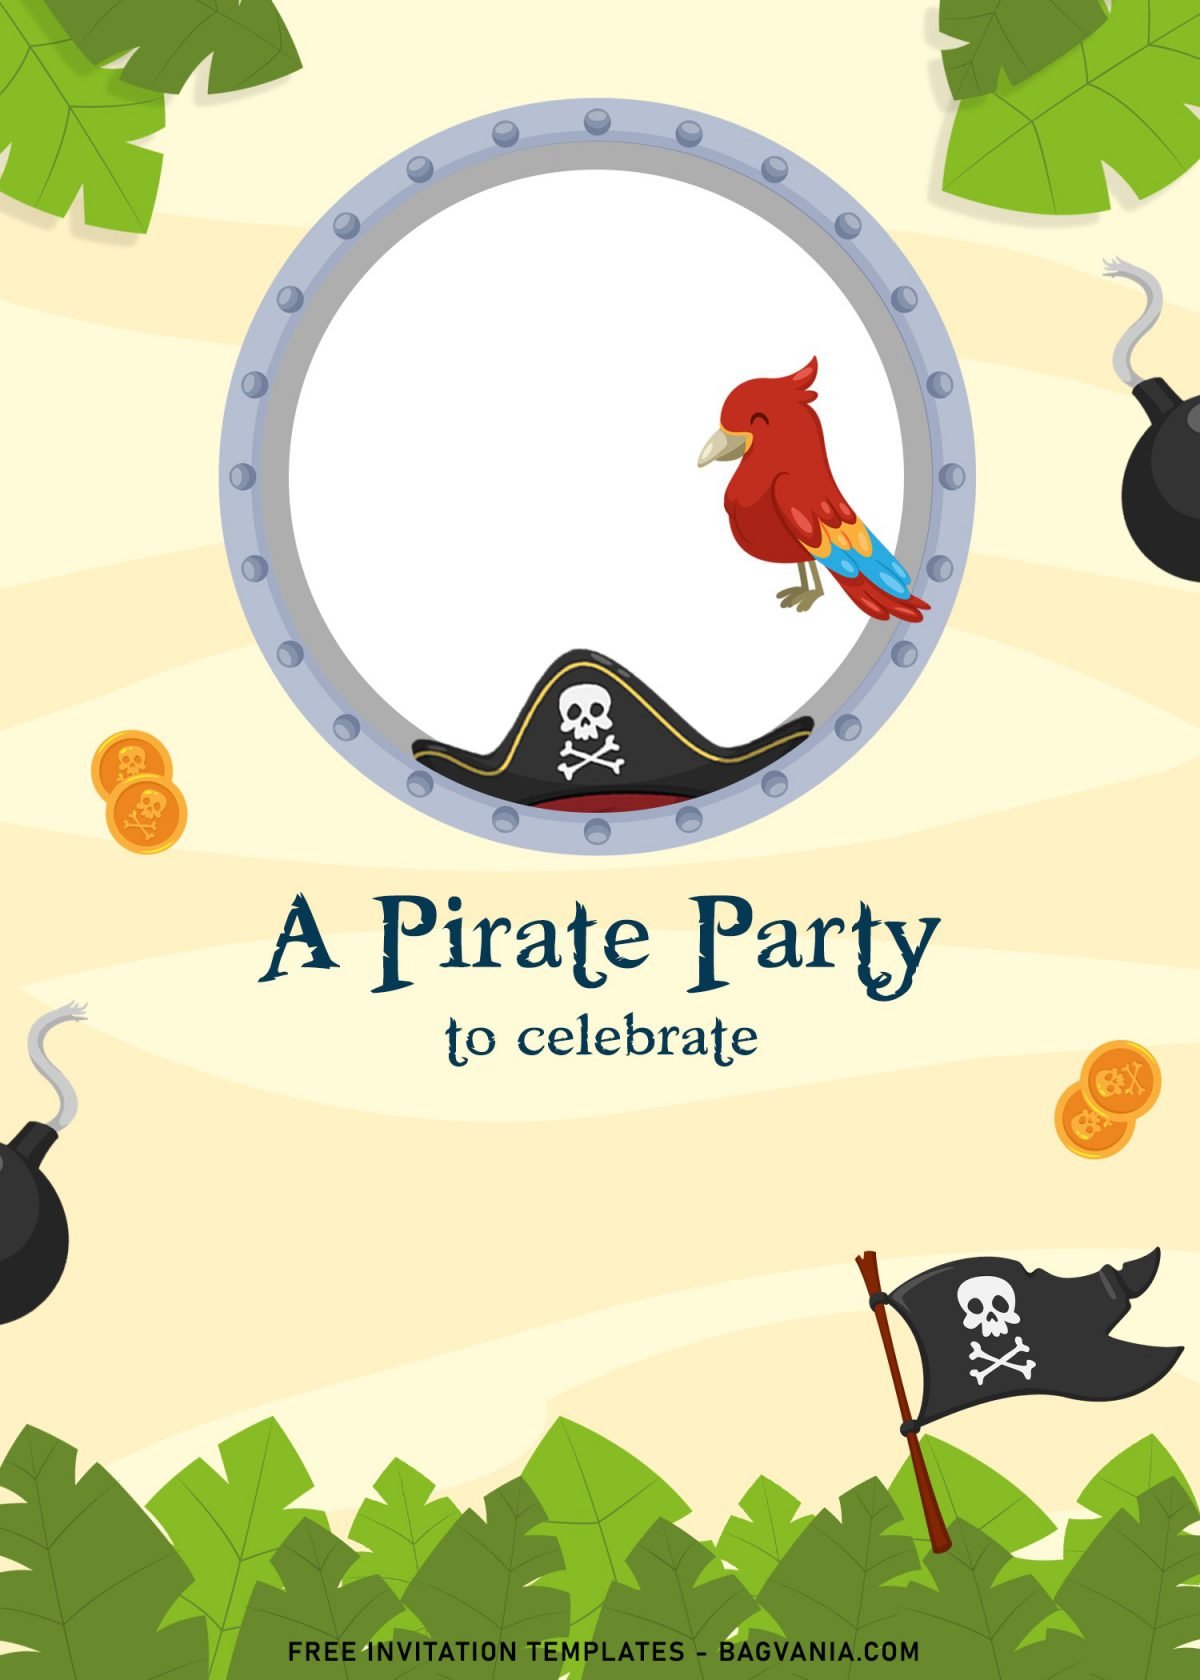 9+ Cute Pirate Birthday Invitation Templates For Your Son's Upcoming Birthday and has Baby Pirate Hat